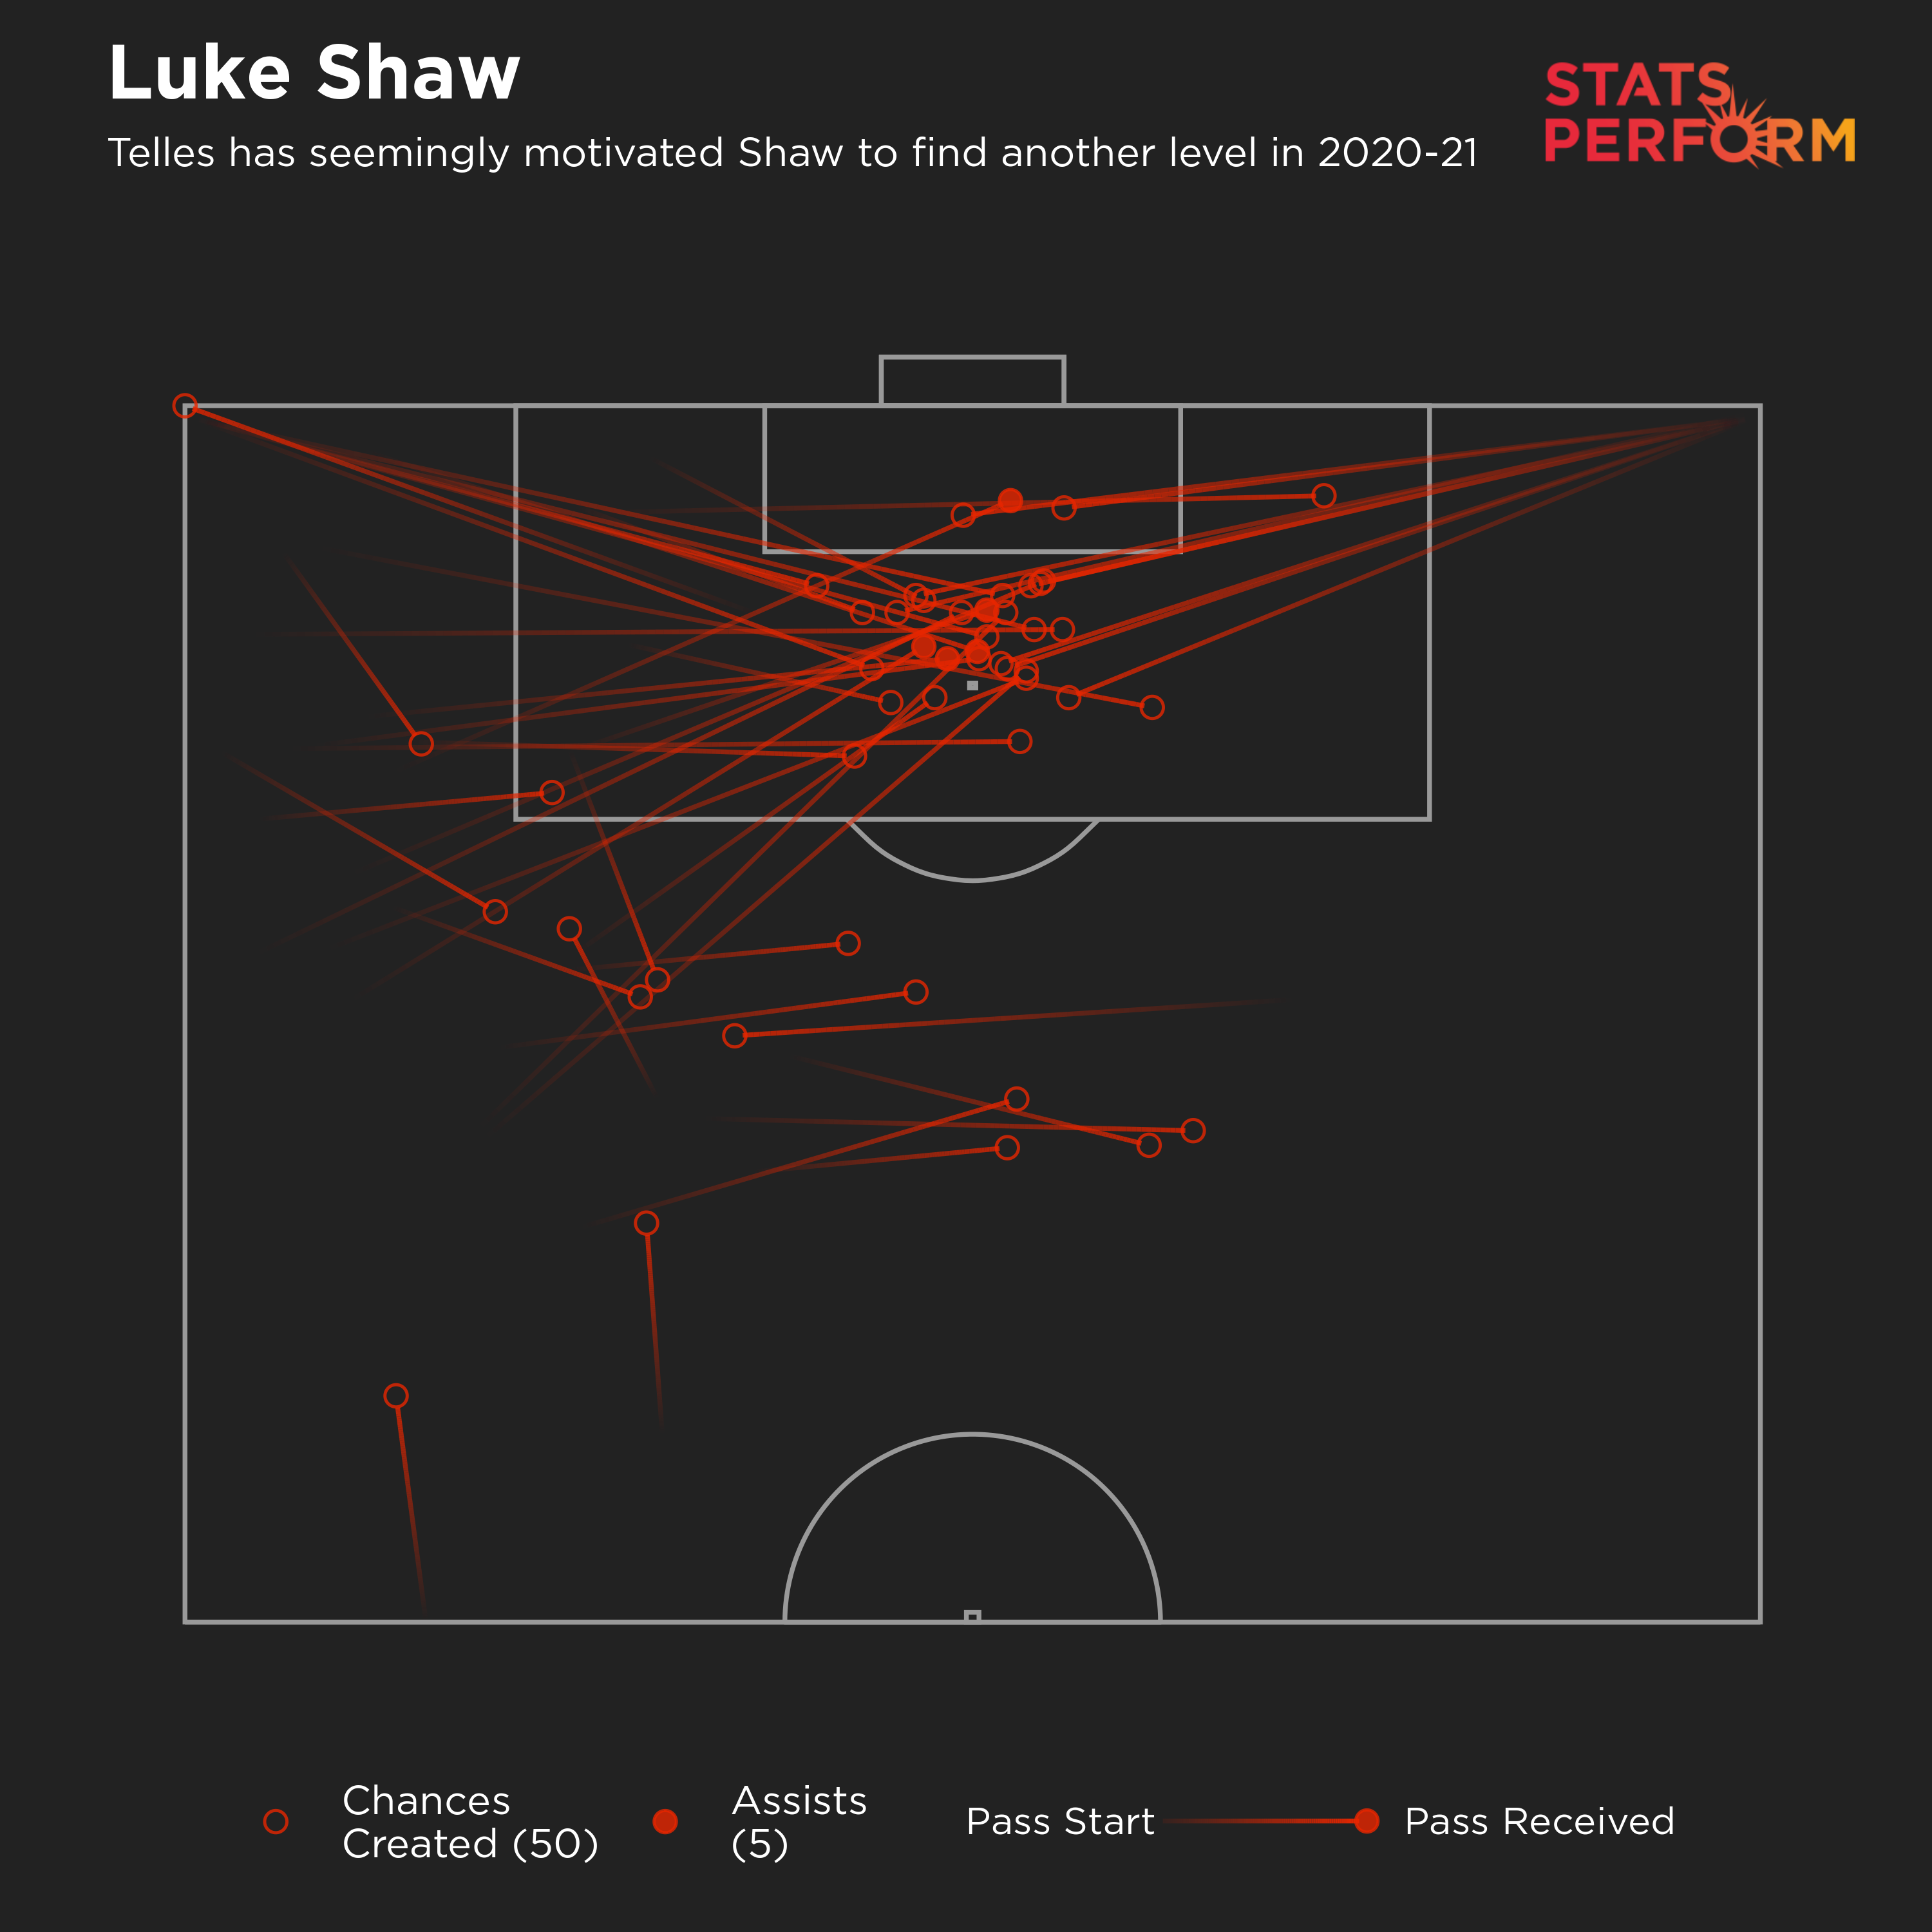 Luke Shaw's chances created map for 2020-21